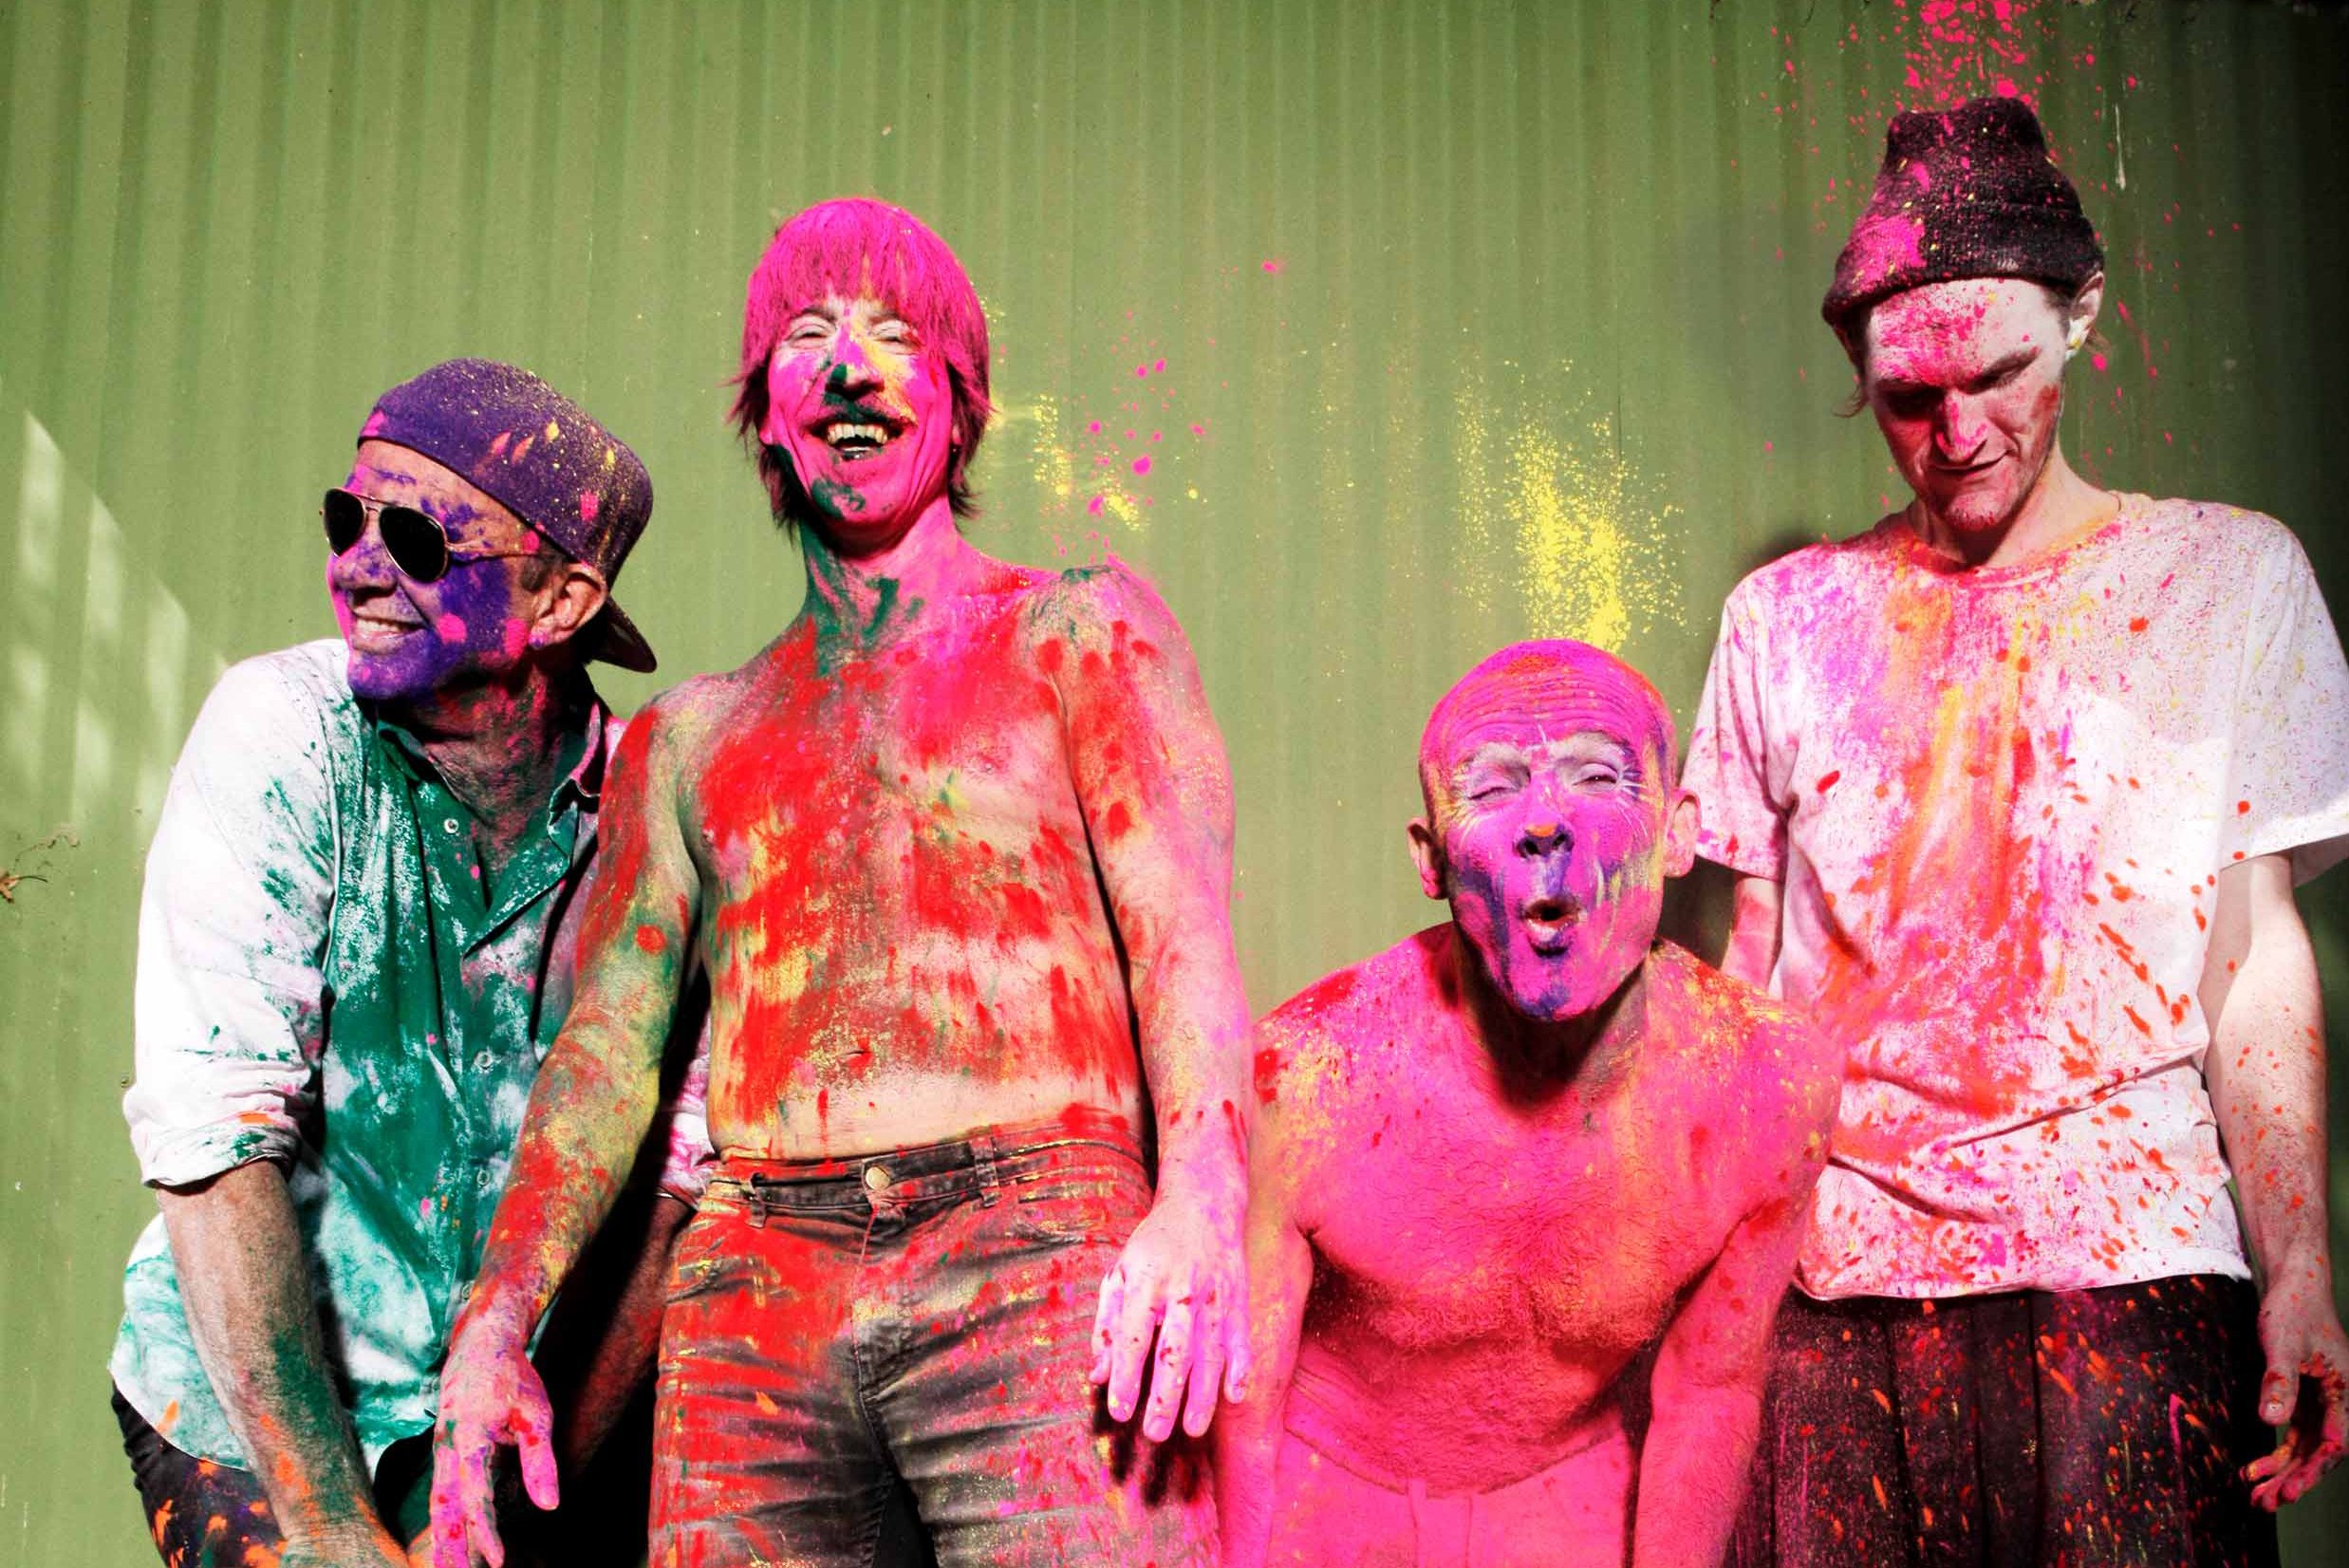 Red hot peppers клипы. Red hot Chili Peppers. Группа ред хот Чили. Red hot Chili Peppers 2016. Ред Холли Чили пеперс.